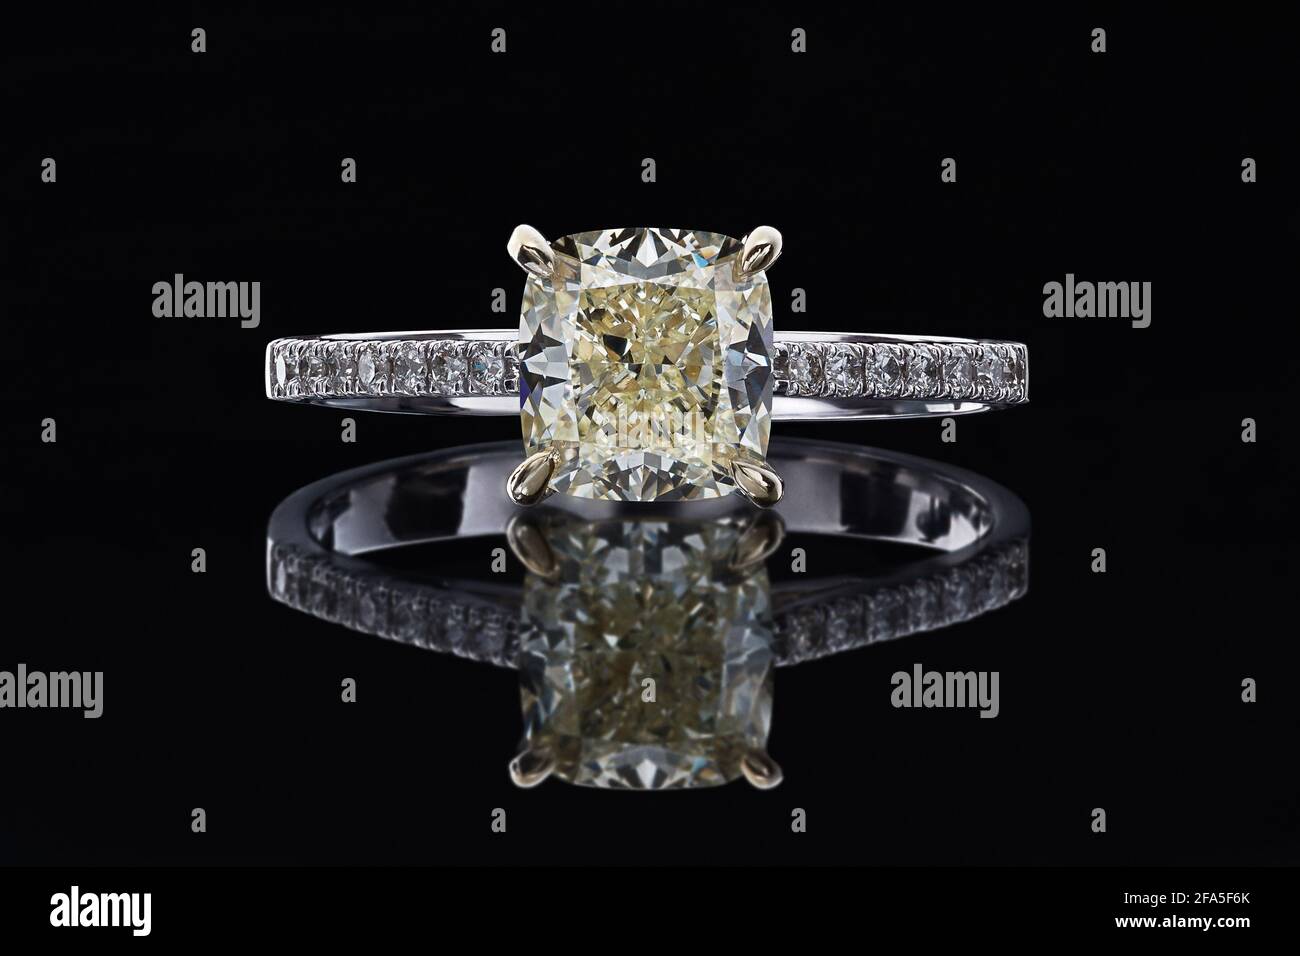 Ring with diamonds on a black background, with reflection. Stock Photo